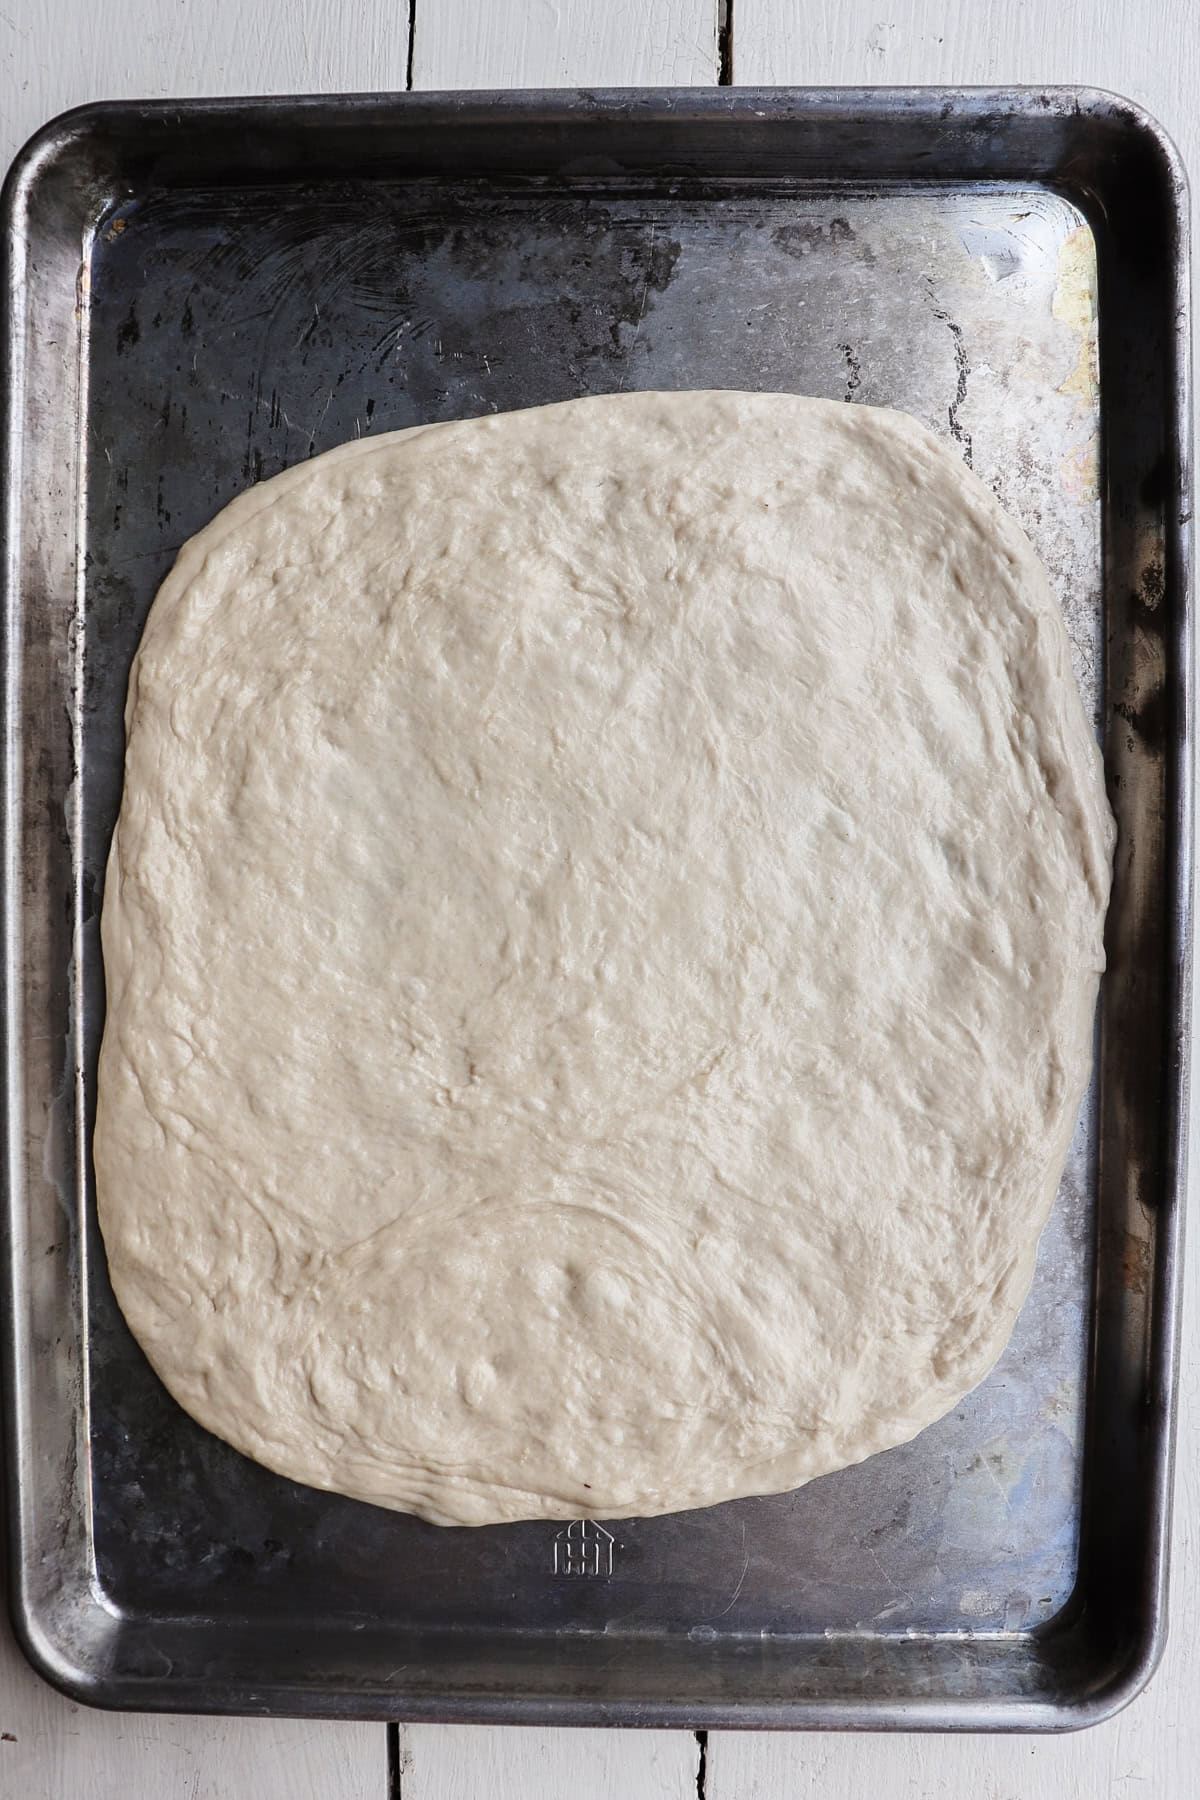 rolled out pizza dough.